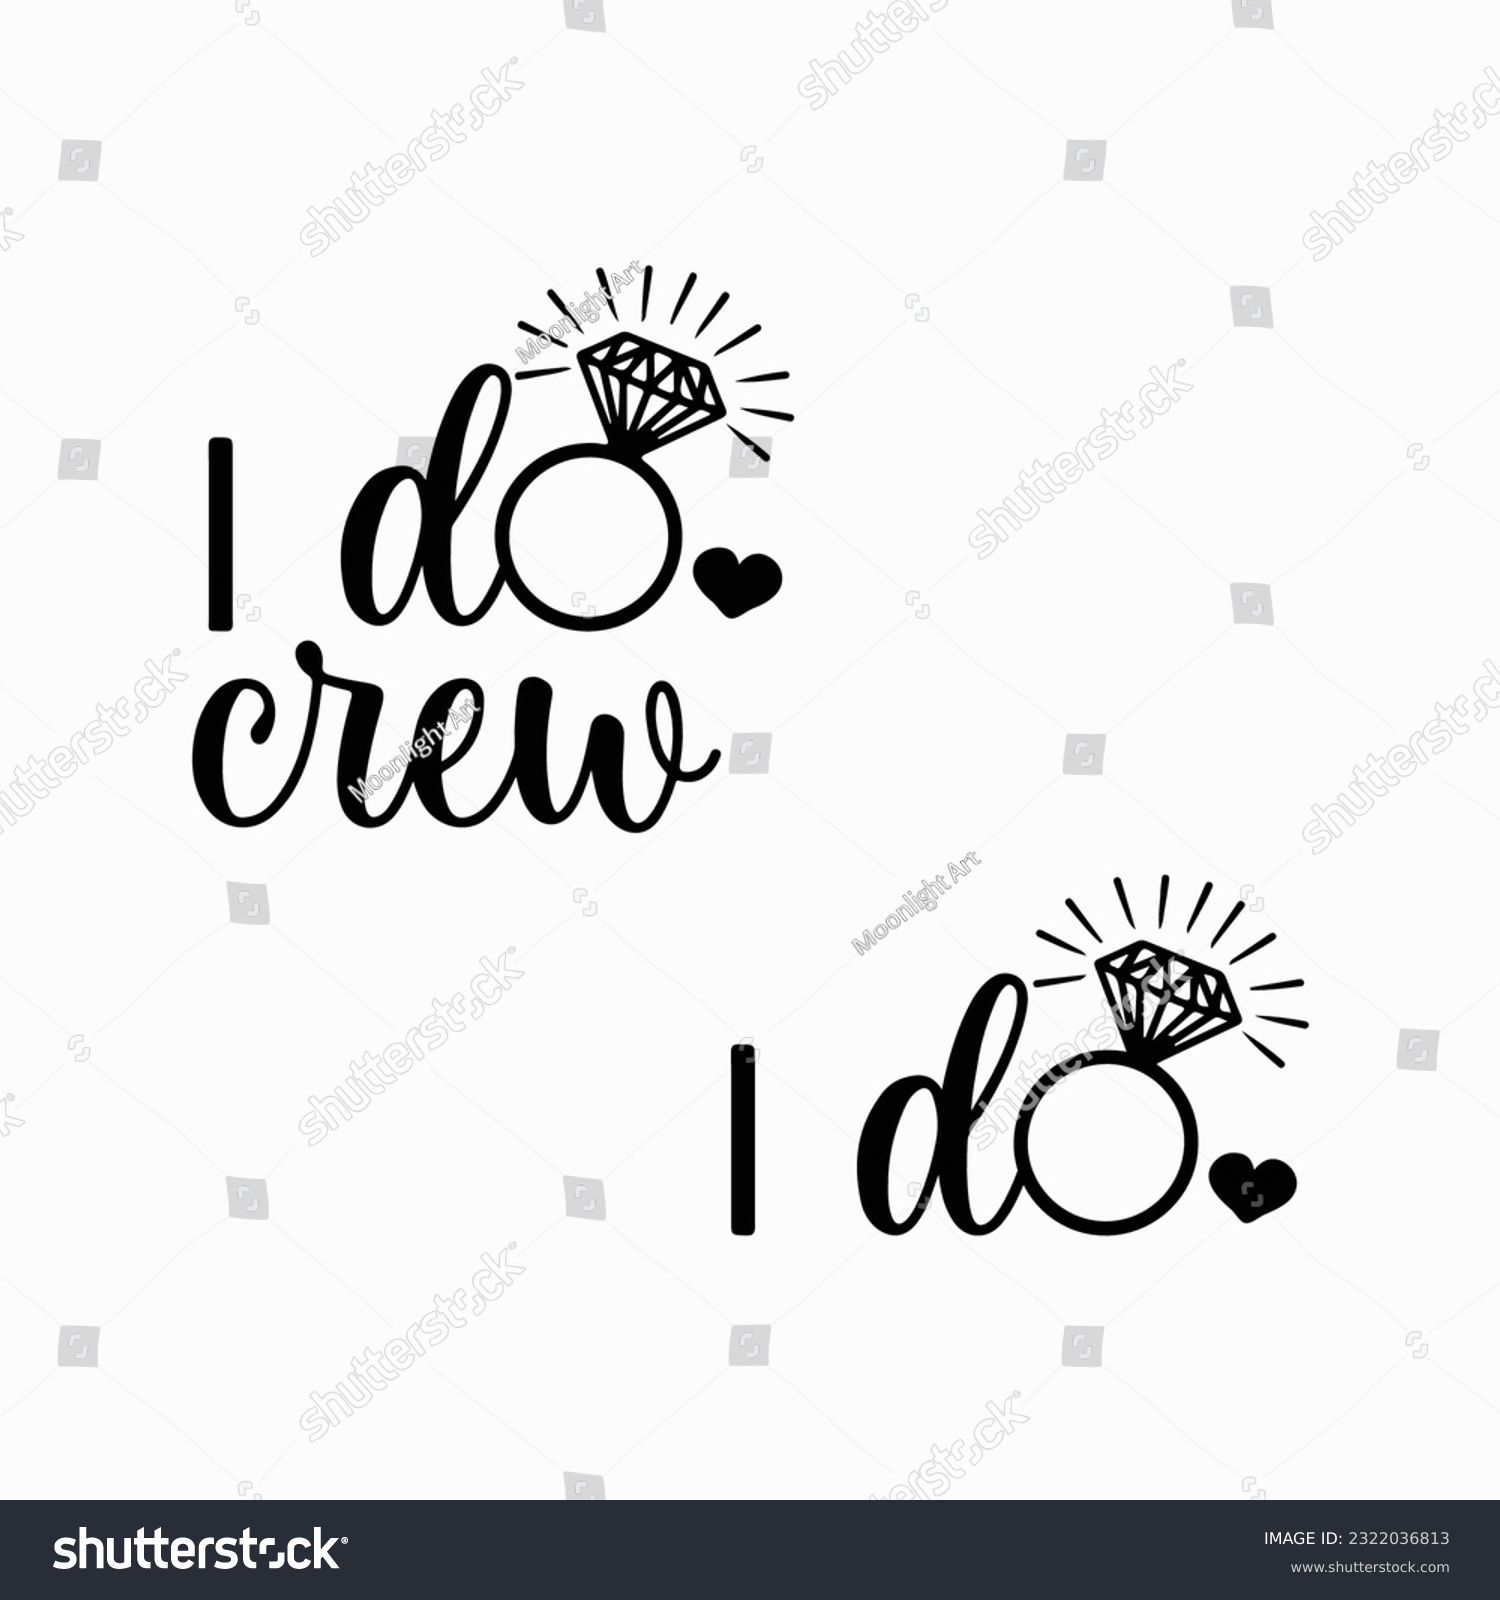 SVG of I do Crew Svg, Bride Tribe Svg, Bridal Team Svg. Vector Cut file for Cricut, Silhouette, Pdf Png Eps Dxf, Decal, Sticker, Vinyl, Pin svg